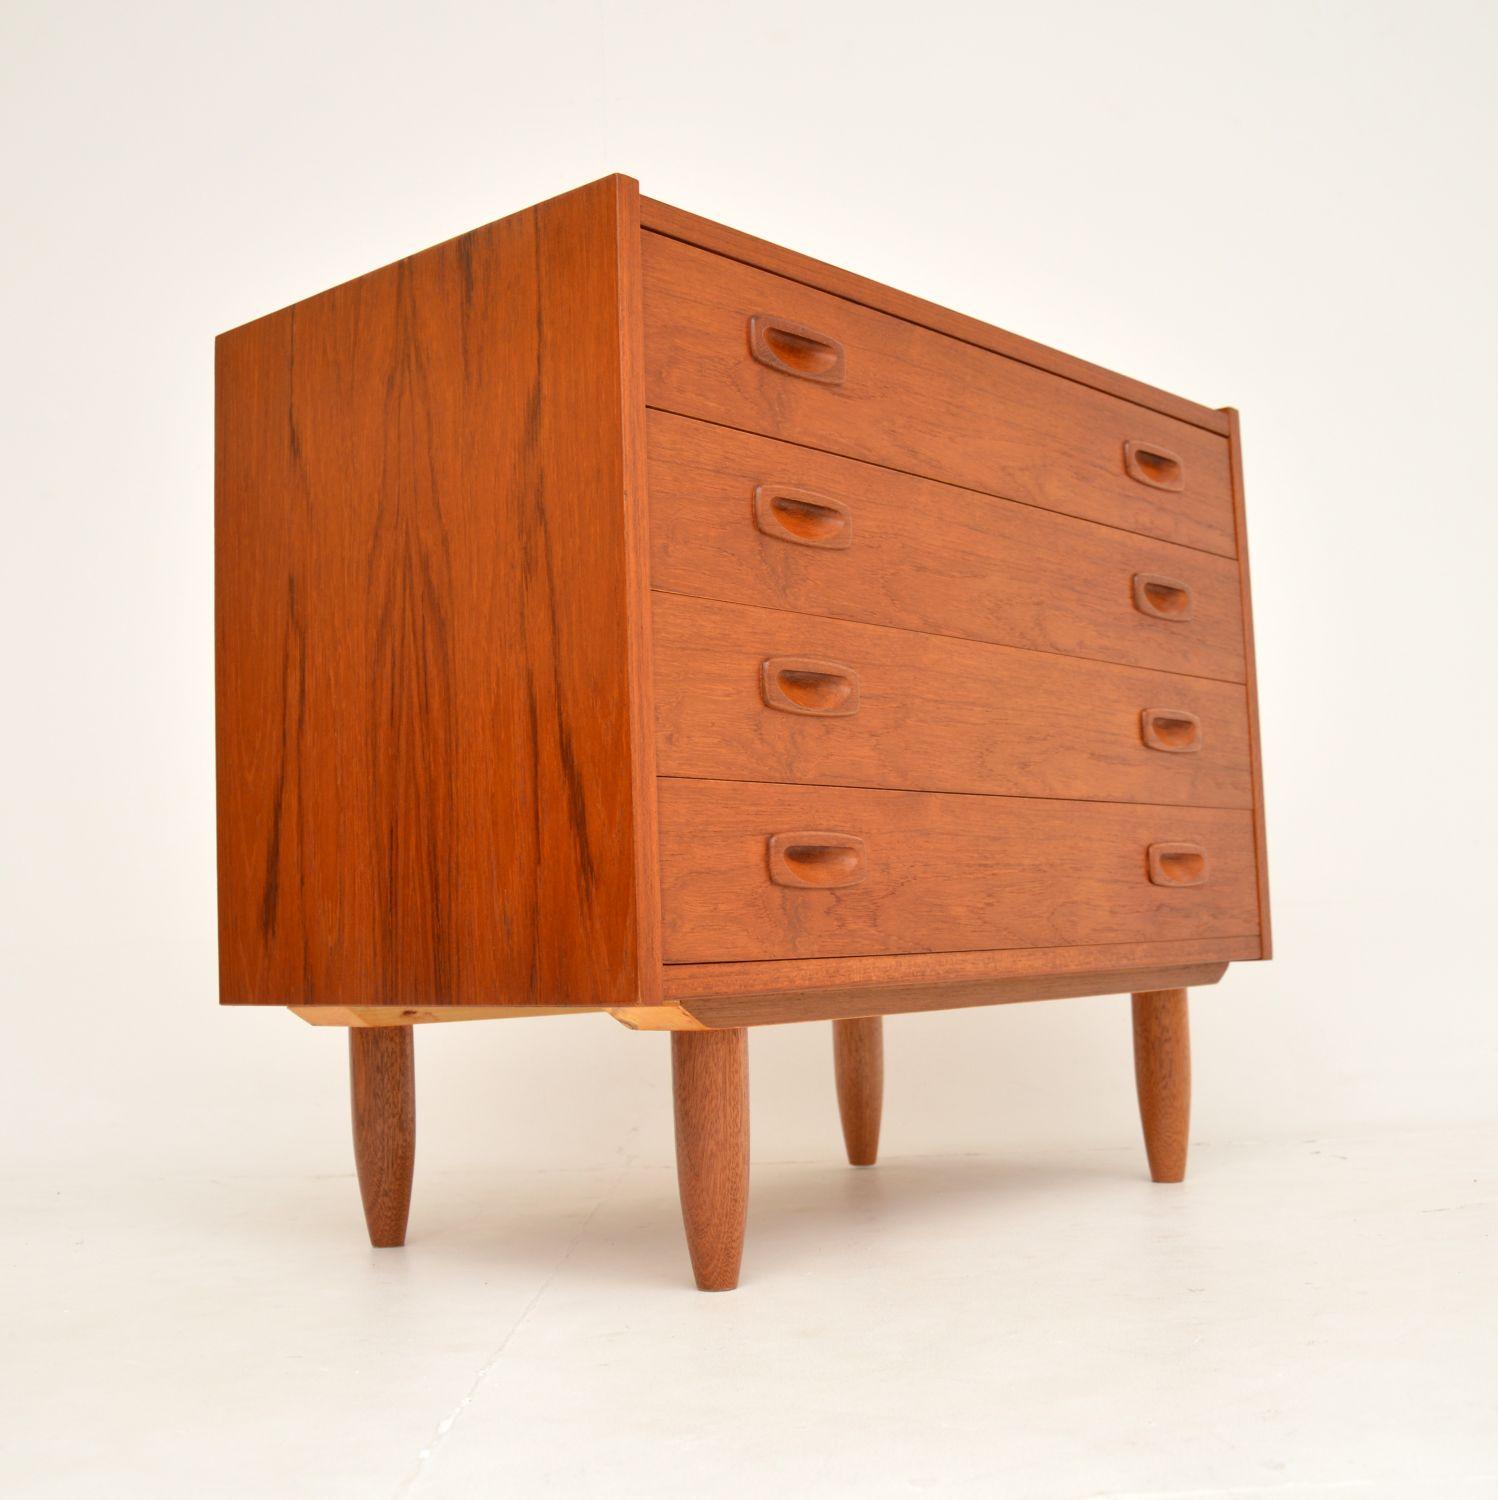 A stylish and very well made Danish vintage chest of drawers in teak. This was designed by Preben Sorensen, it dates from the 1960’s.

It is a great size and is of amazing quality. The drawers all run smoothly, the top drawer has green felt